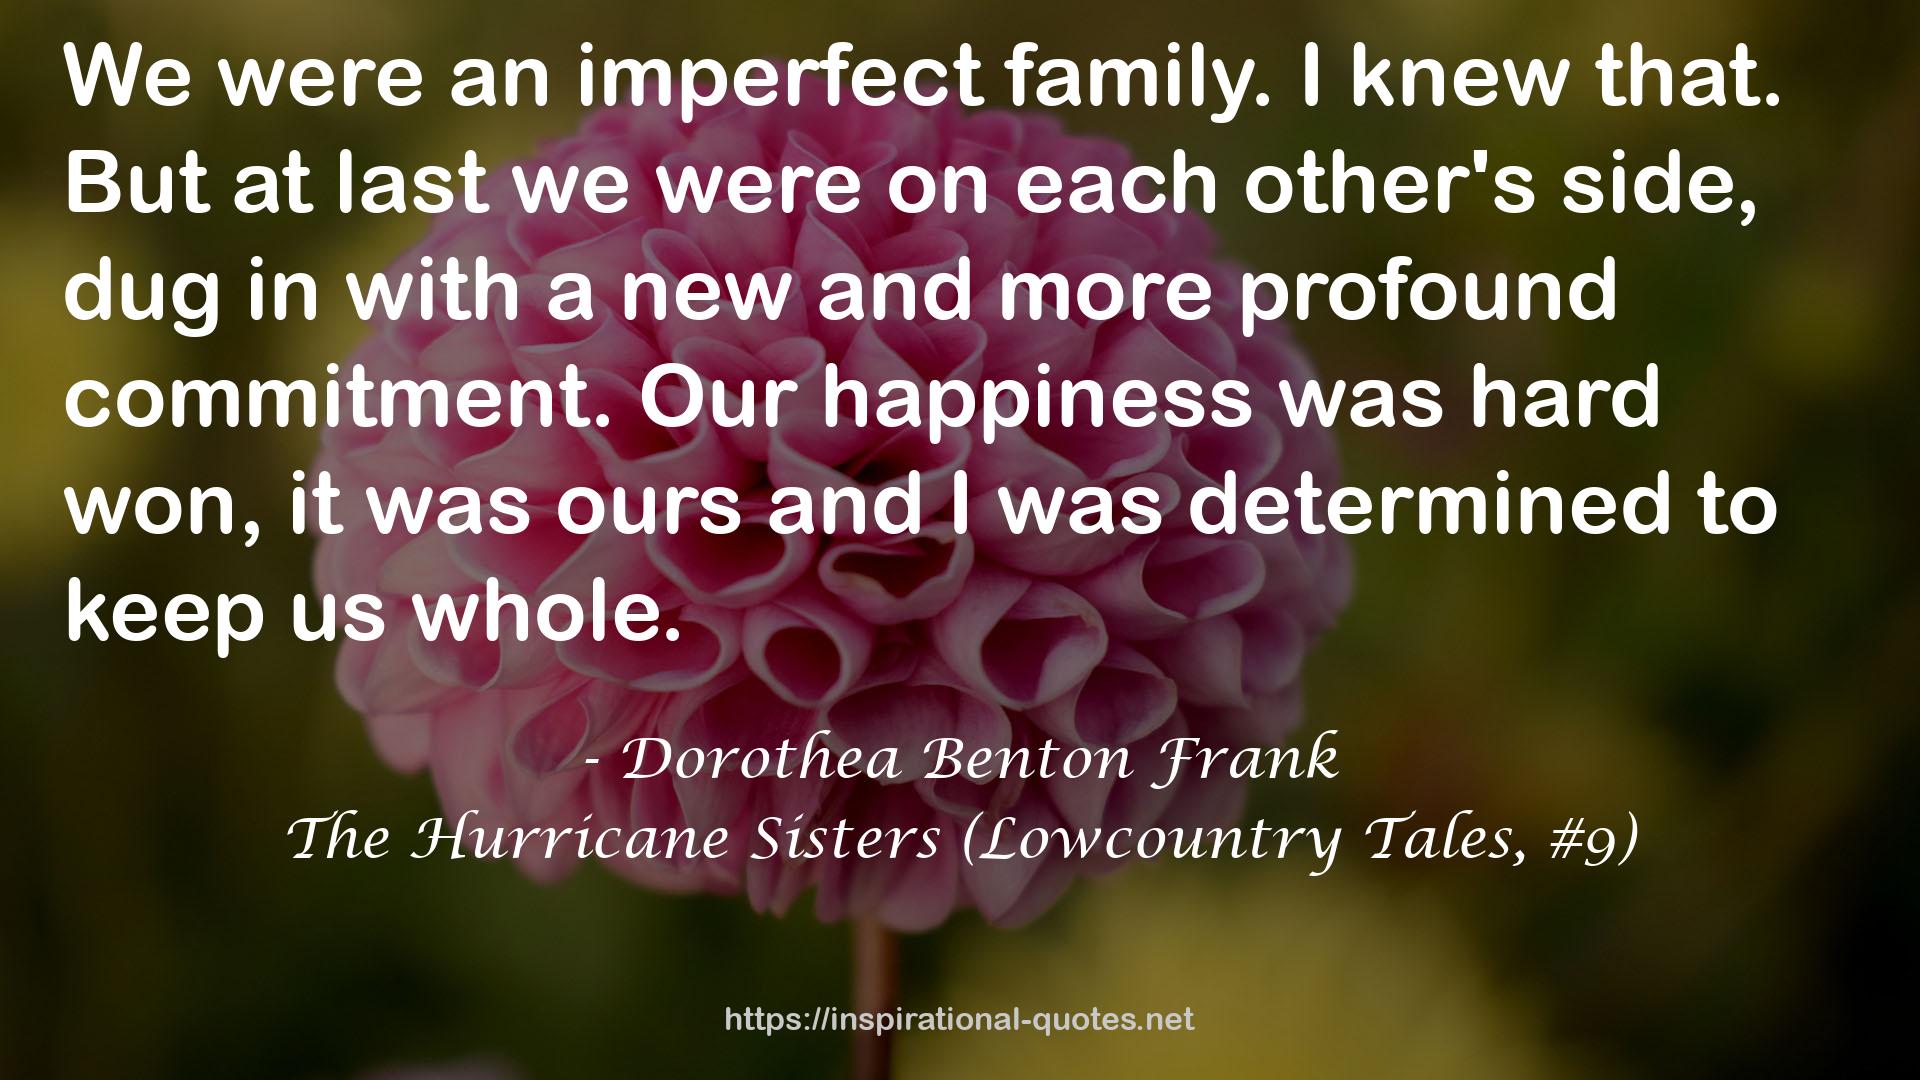 The Hurricane Sisters (Lowcountry Tales, #9) QUOTES